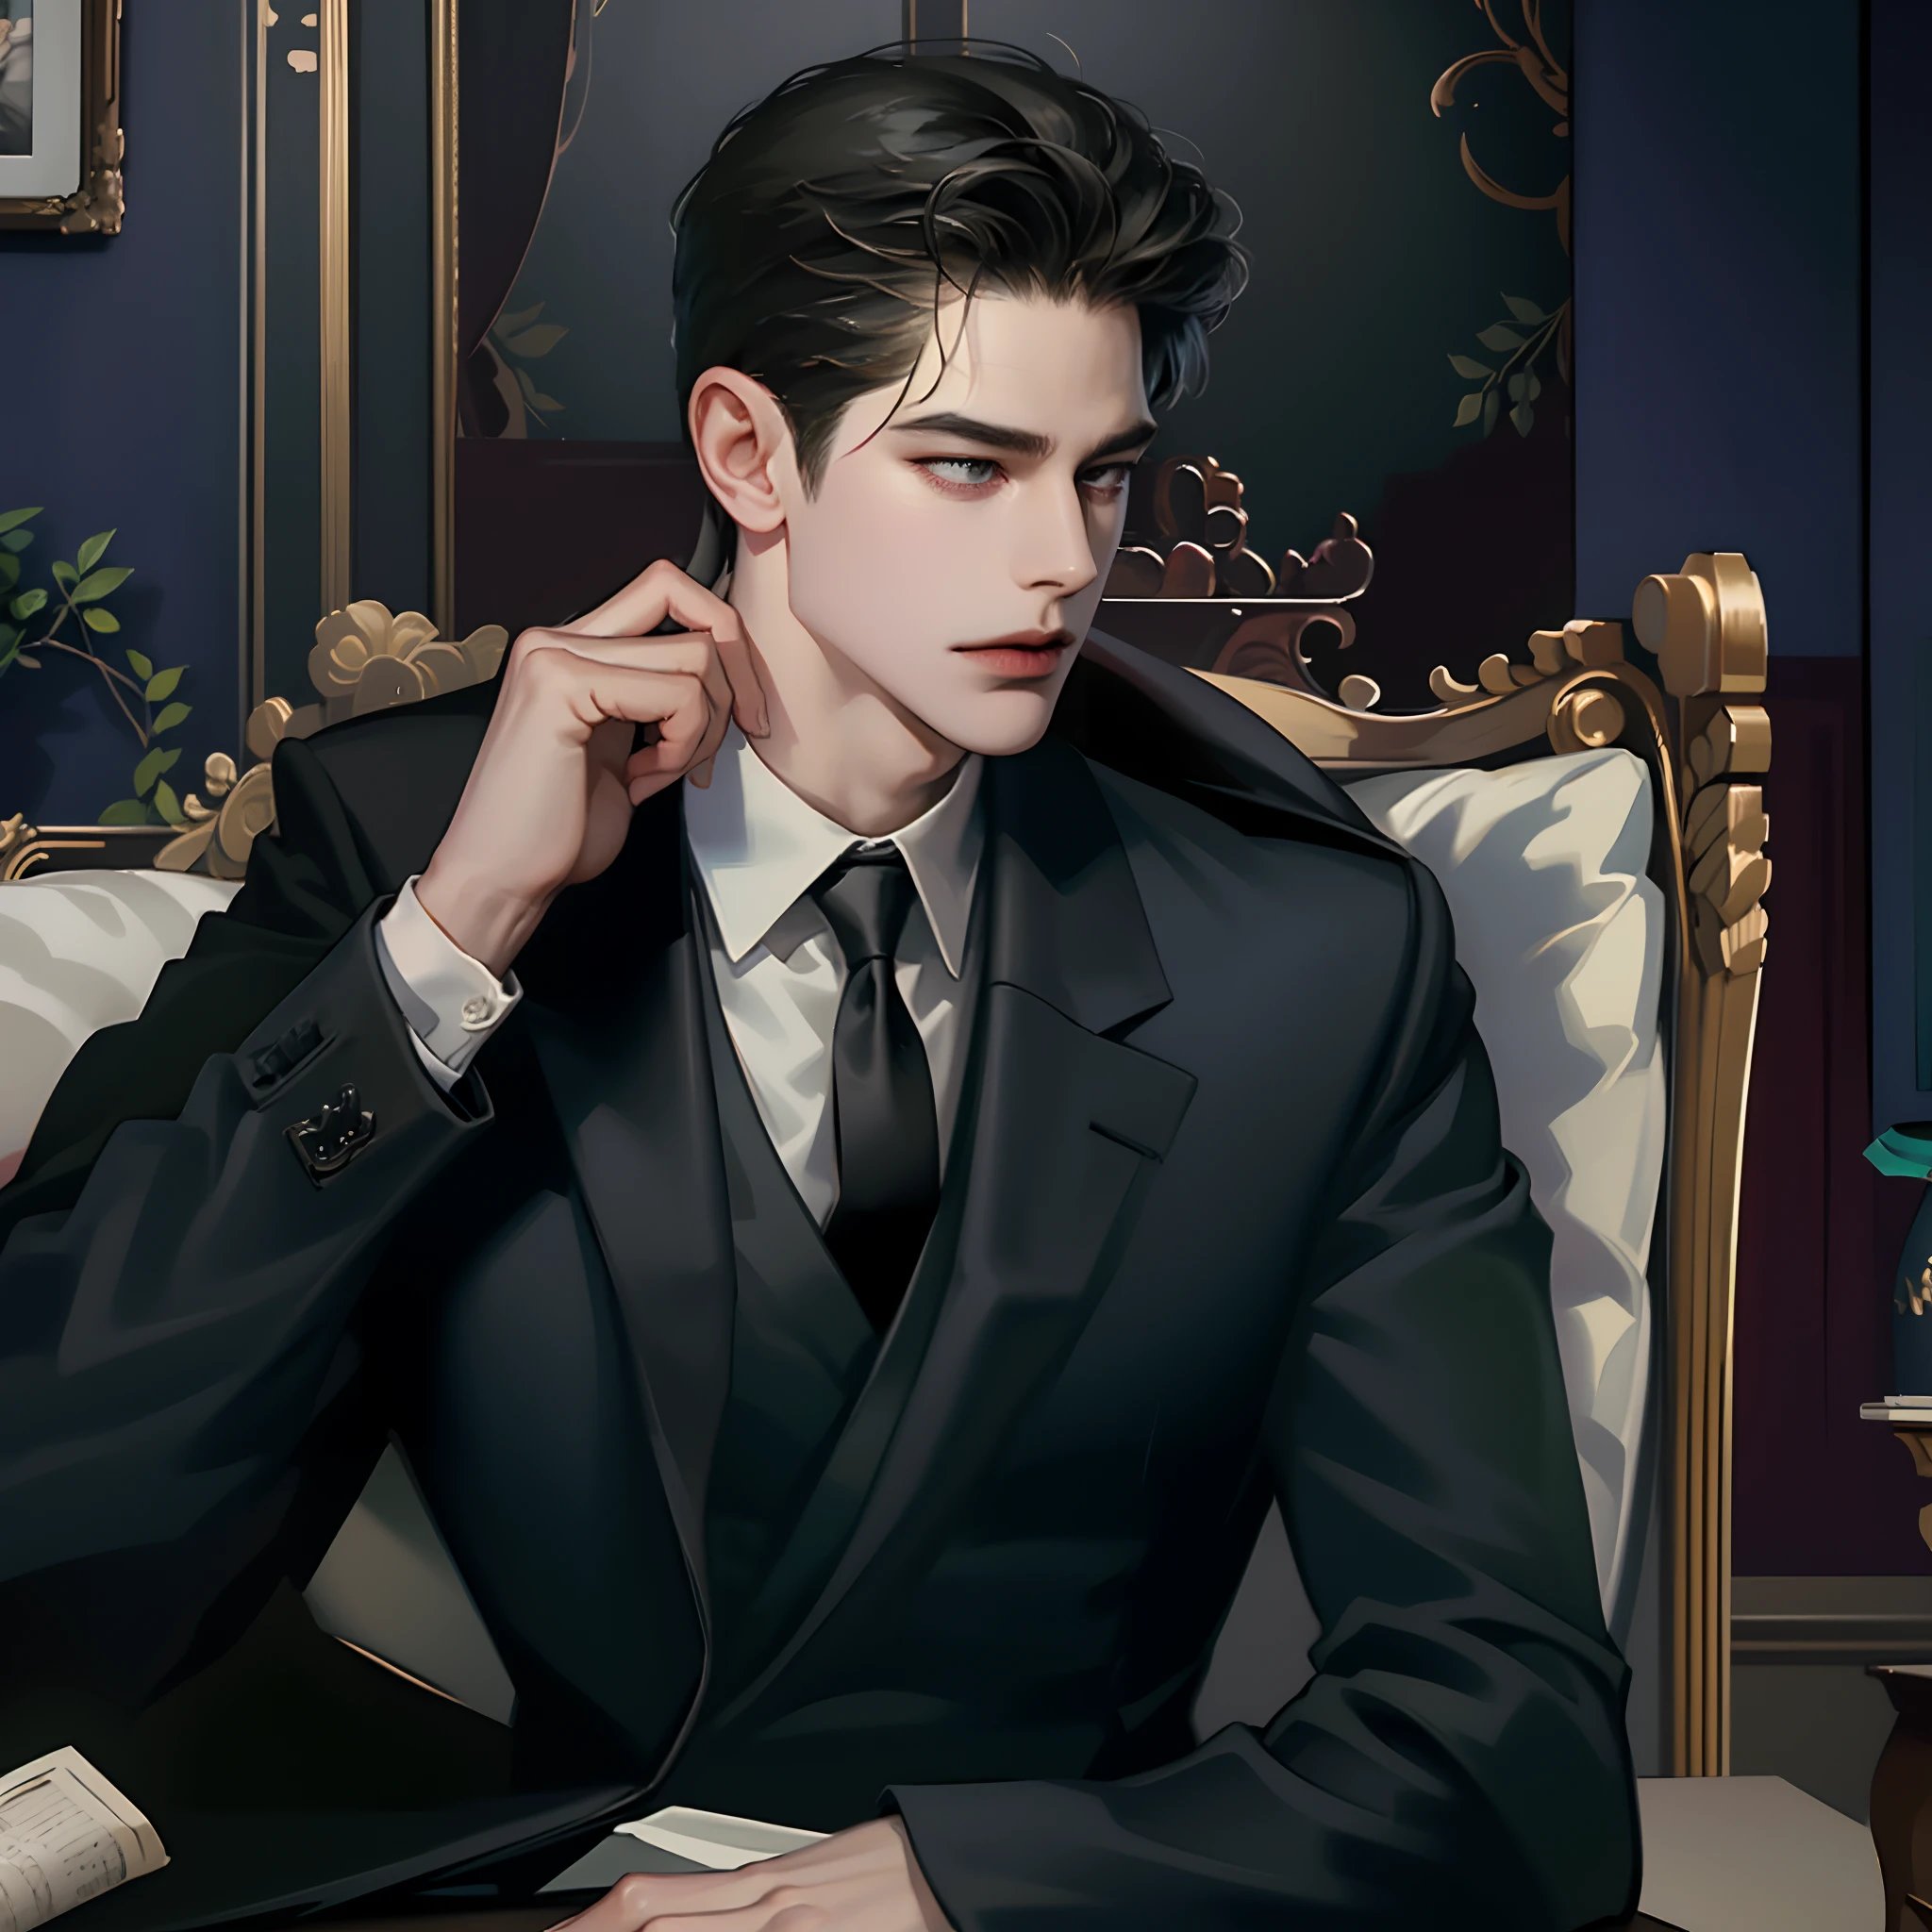 (Photorealistic:1.4), (best quality, masterpiece:1.2), details, (handsome:1.1) man, (black suits), (tie), (expensive watch), (gelled hair), (spectacles), (veined hands), office, CEO, (wine), (luxurious), (modern), (spacious) room Explanation: - (best quality, masterpiece:1.2): This tag indicates that the generated image should be of the highest quality, like a masterpiece. Increasing the strength to 1.2 emphasizes the importance of this tag. - (details): This tag emphasizes the need for attention to detail in the image. - (handsome:1.1): The image should depict a man who is attractive. Strengthening this tag to 1.1 emphasizes the importance of depicting a handsome man. - (black suits), (tie), (expensive watch): These tags describe the man's attire, consisting of a black suit, a tie, and an expensive watch. - (gelled hair): This tag indicates that the man should have his hair styled with gel. - (spectacles): The man should be wearing spectacles. - (veined hands): This tag highlights the importance of depicting detailed veins on the man's hands. - office, CEO: The scene should be set in an office, and the man should be portrayed as the CEO. - (wine): The man can be seen holding a glass of wine, indicating a luxurious setting. - (luxurious): This tag emphasizes the need to depict a luxurious atmosphere. - (modern): The room should have a modern design. - (spacious) room: The room should be spacious. fancy office chair